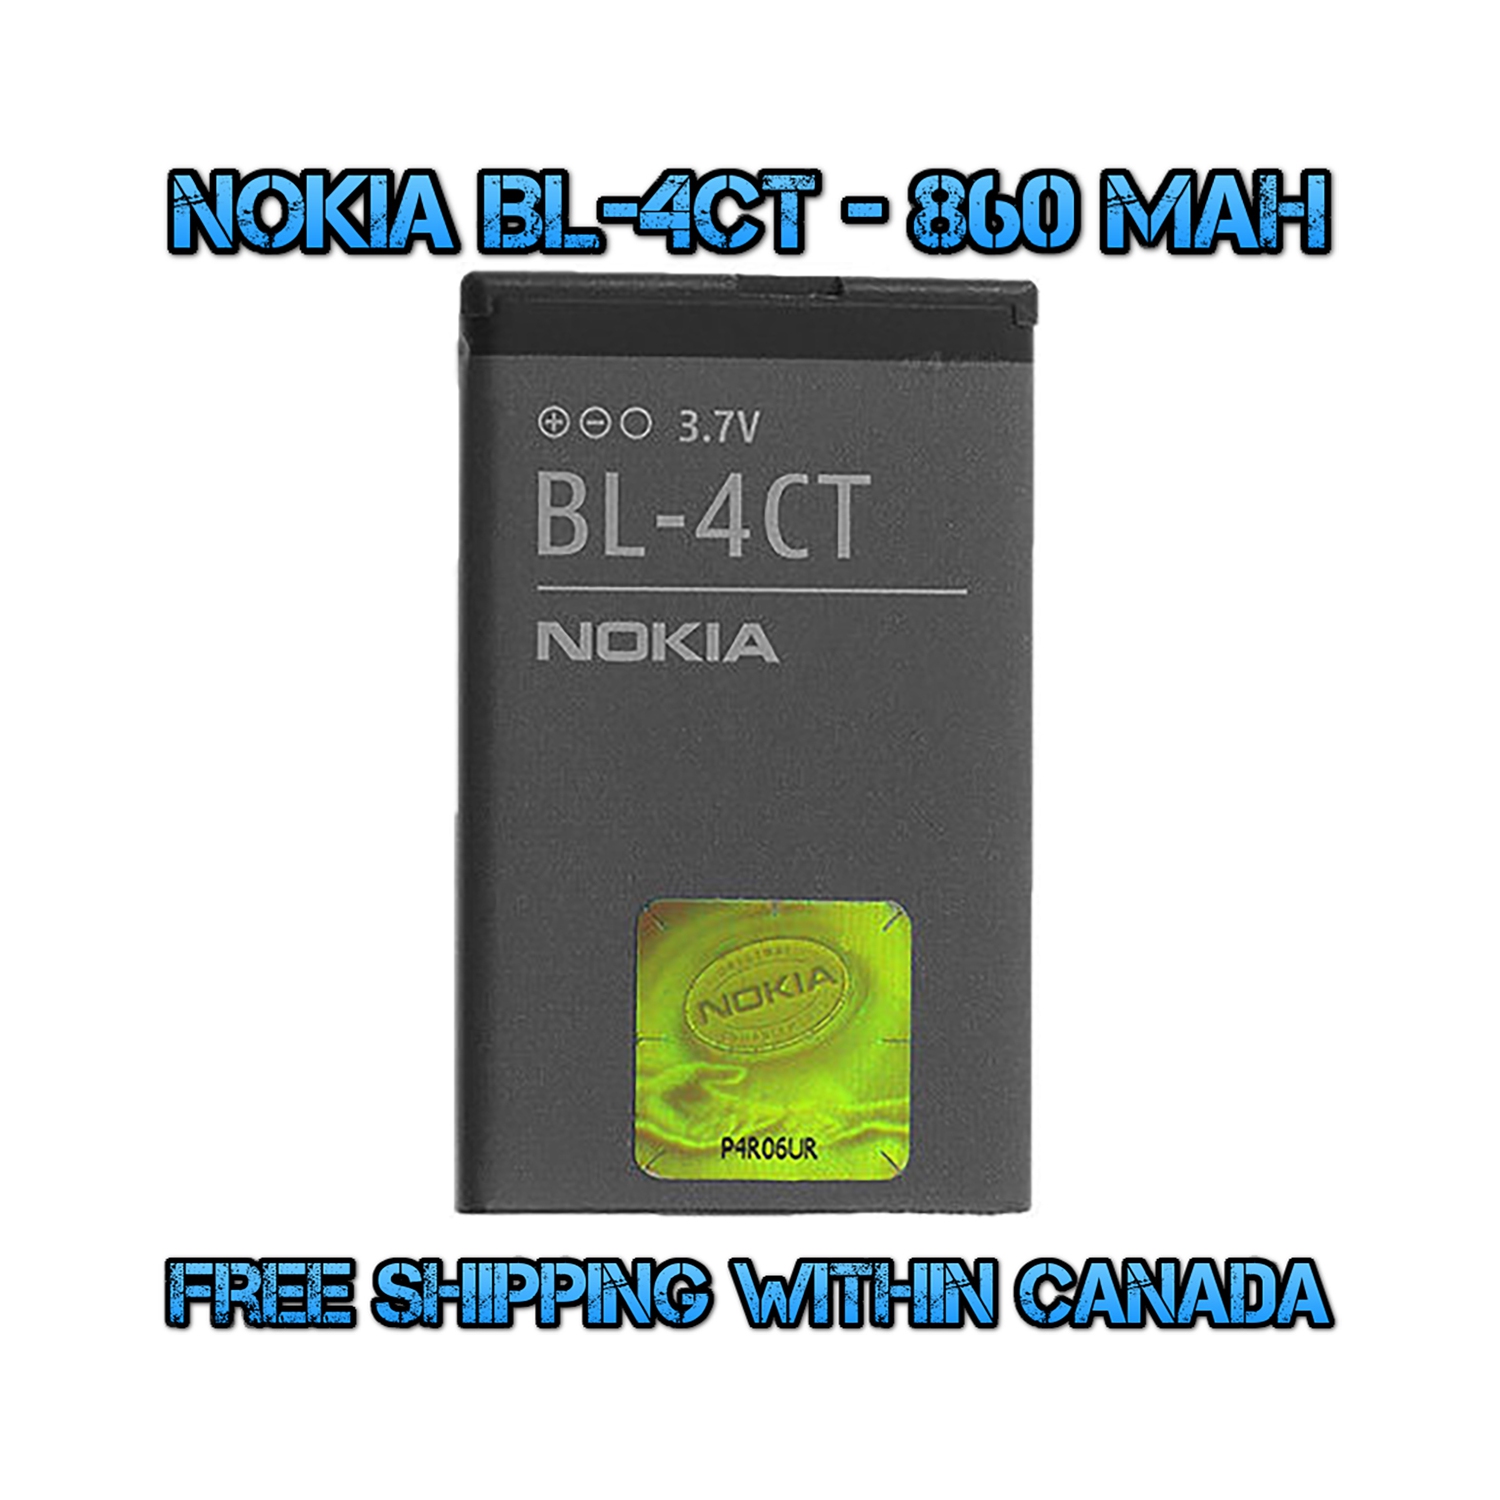 New OEM Replacement Battery Model BL-4CT 860 mAh for Nokia 2720 5310 5630 6700 7230 7210 7310 X3 - (FREE SHIPPING)